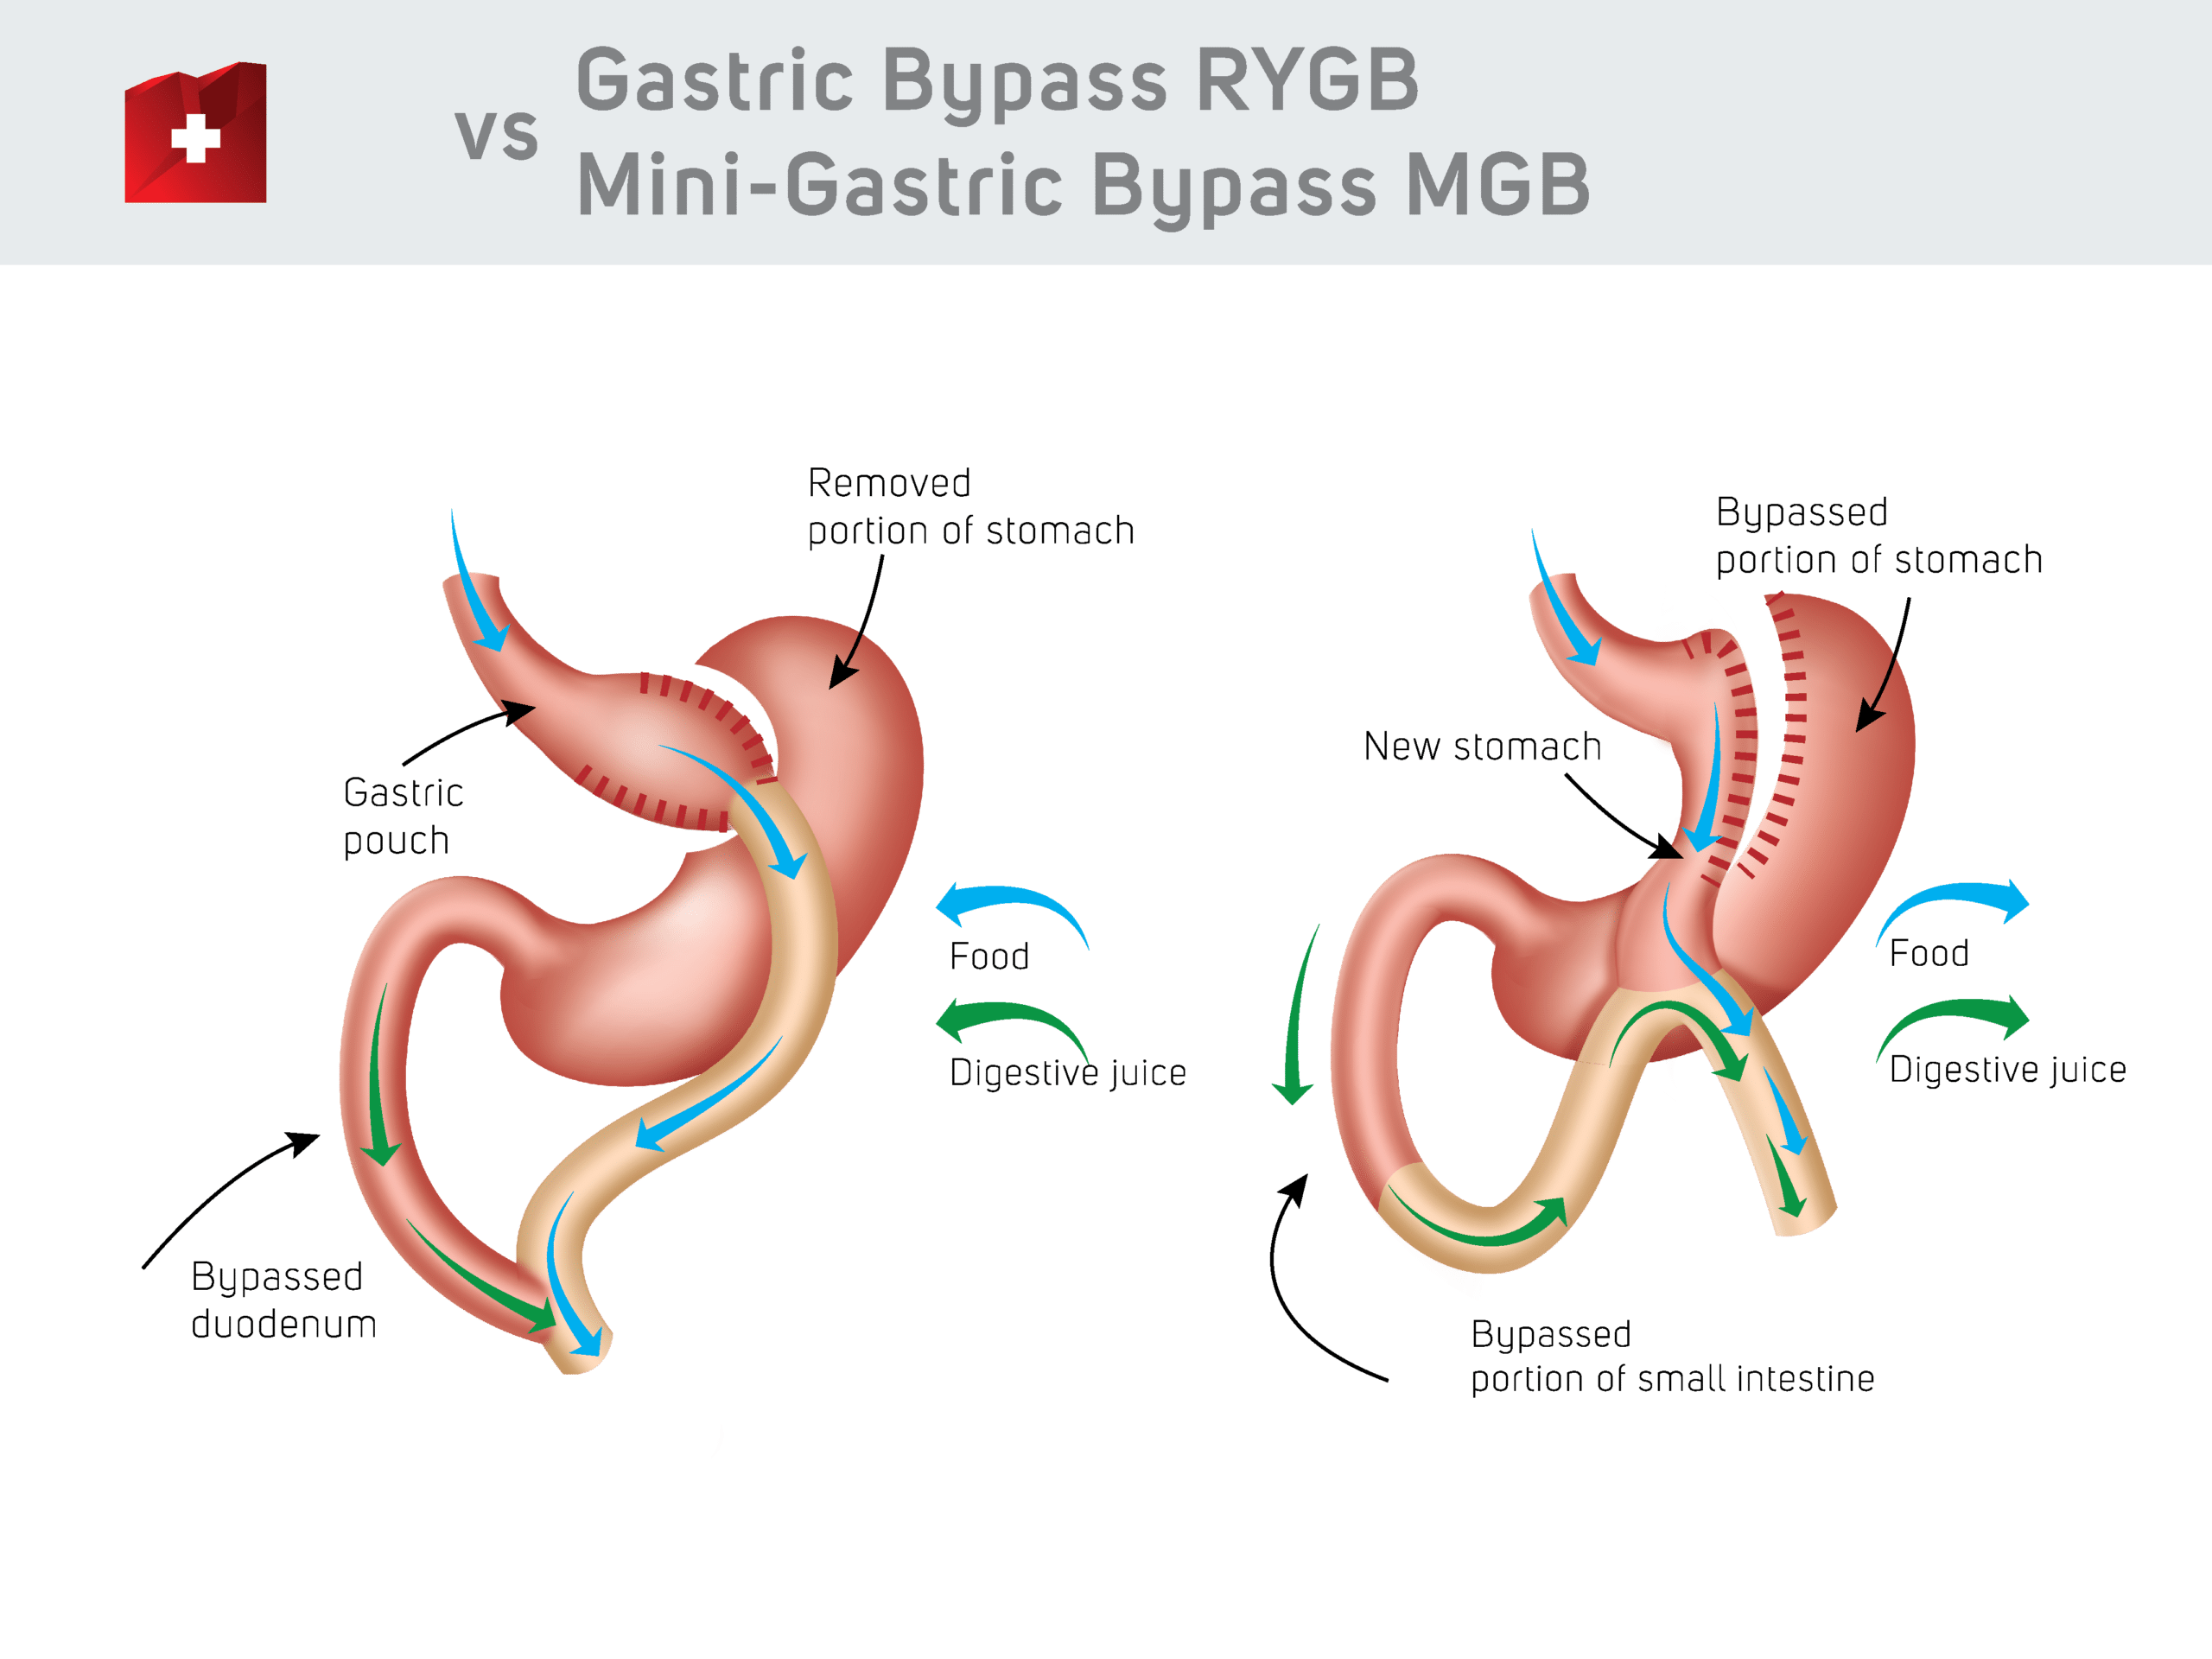 Gastric Bypass vs Mini Gastric Bypass comparasion